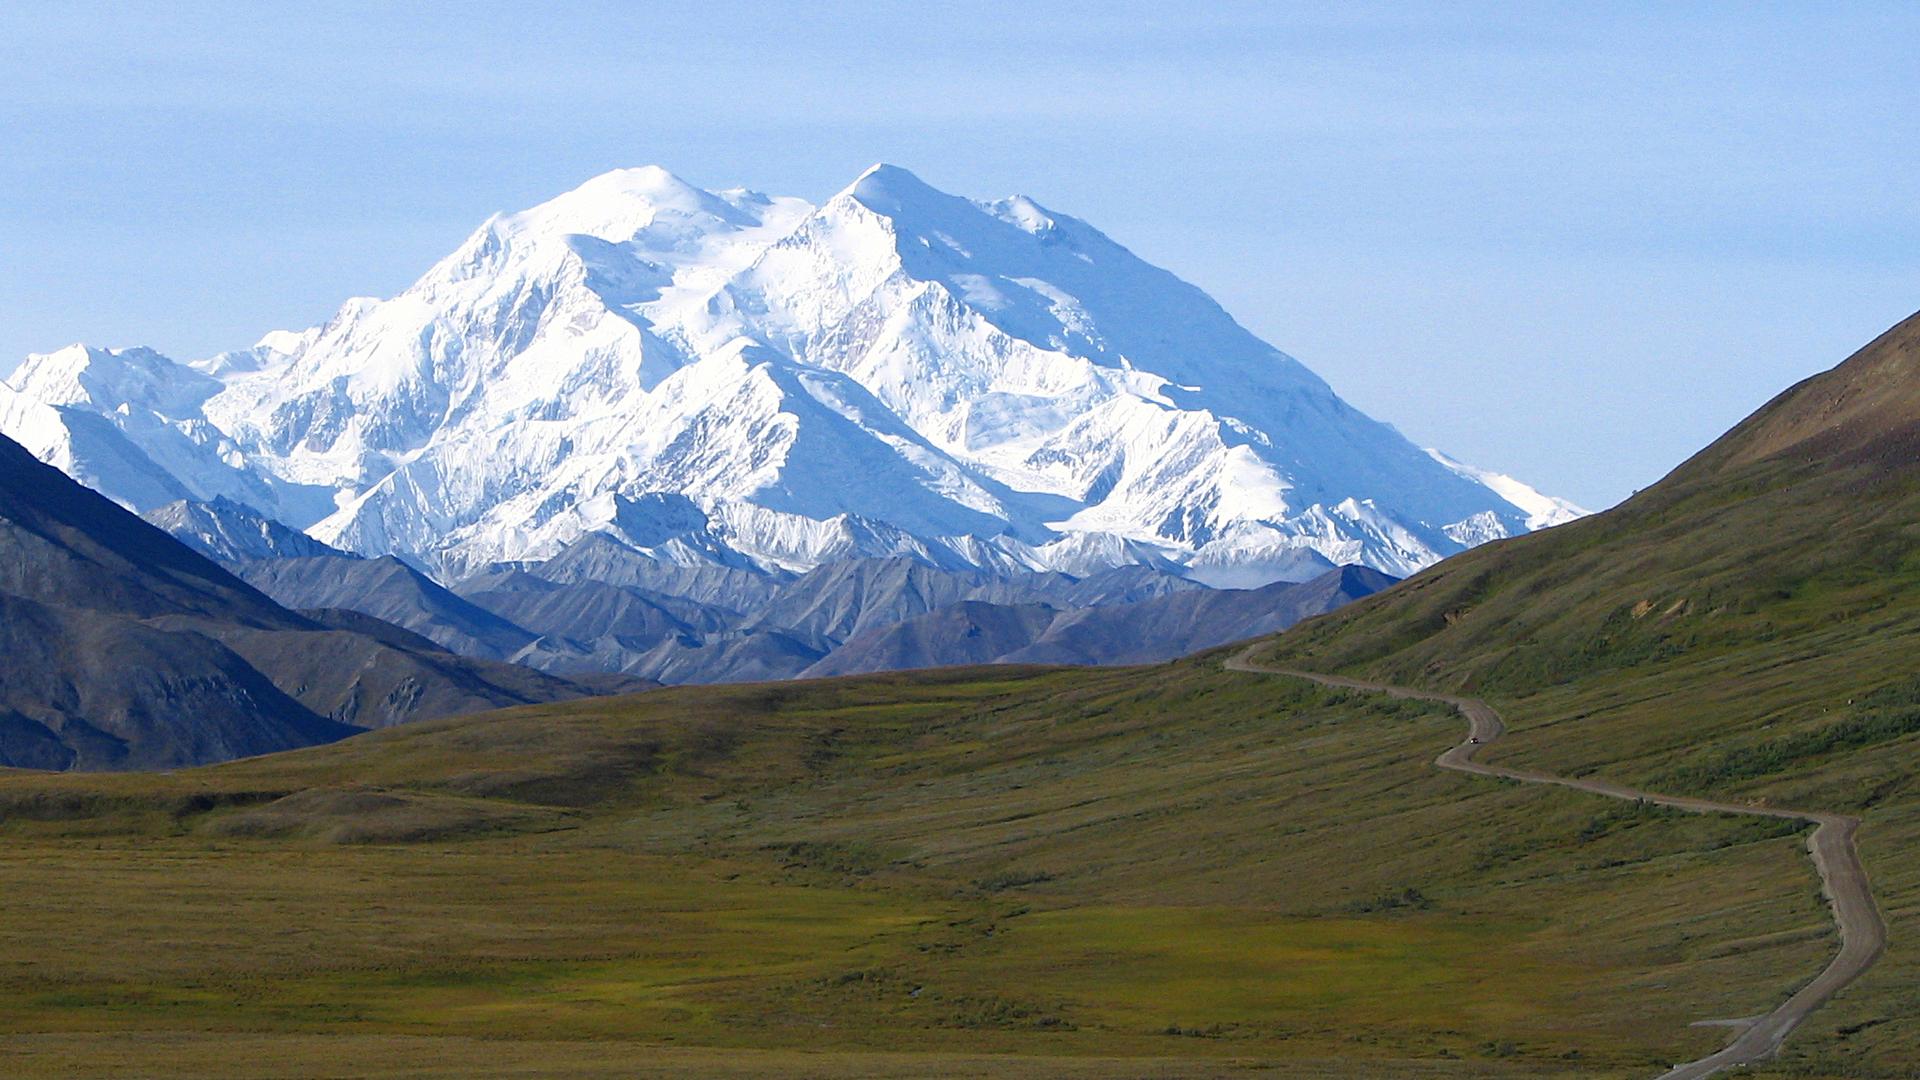 America’s highest peak, as seen from the Stony Dome lookout point in Denali National Park